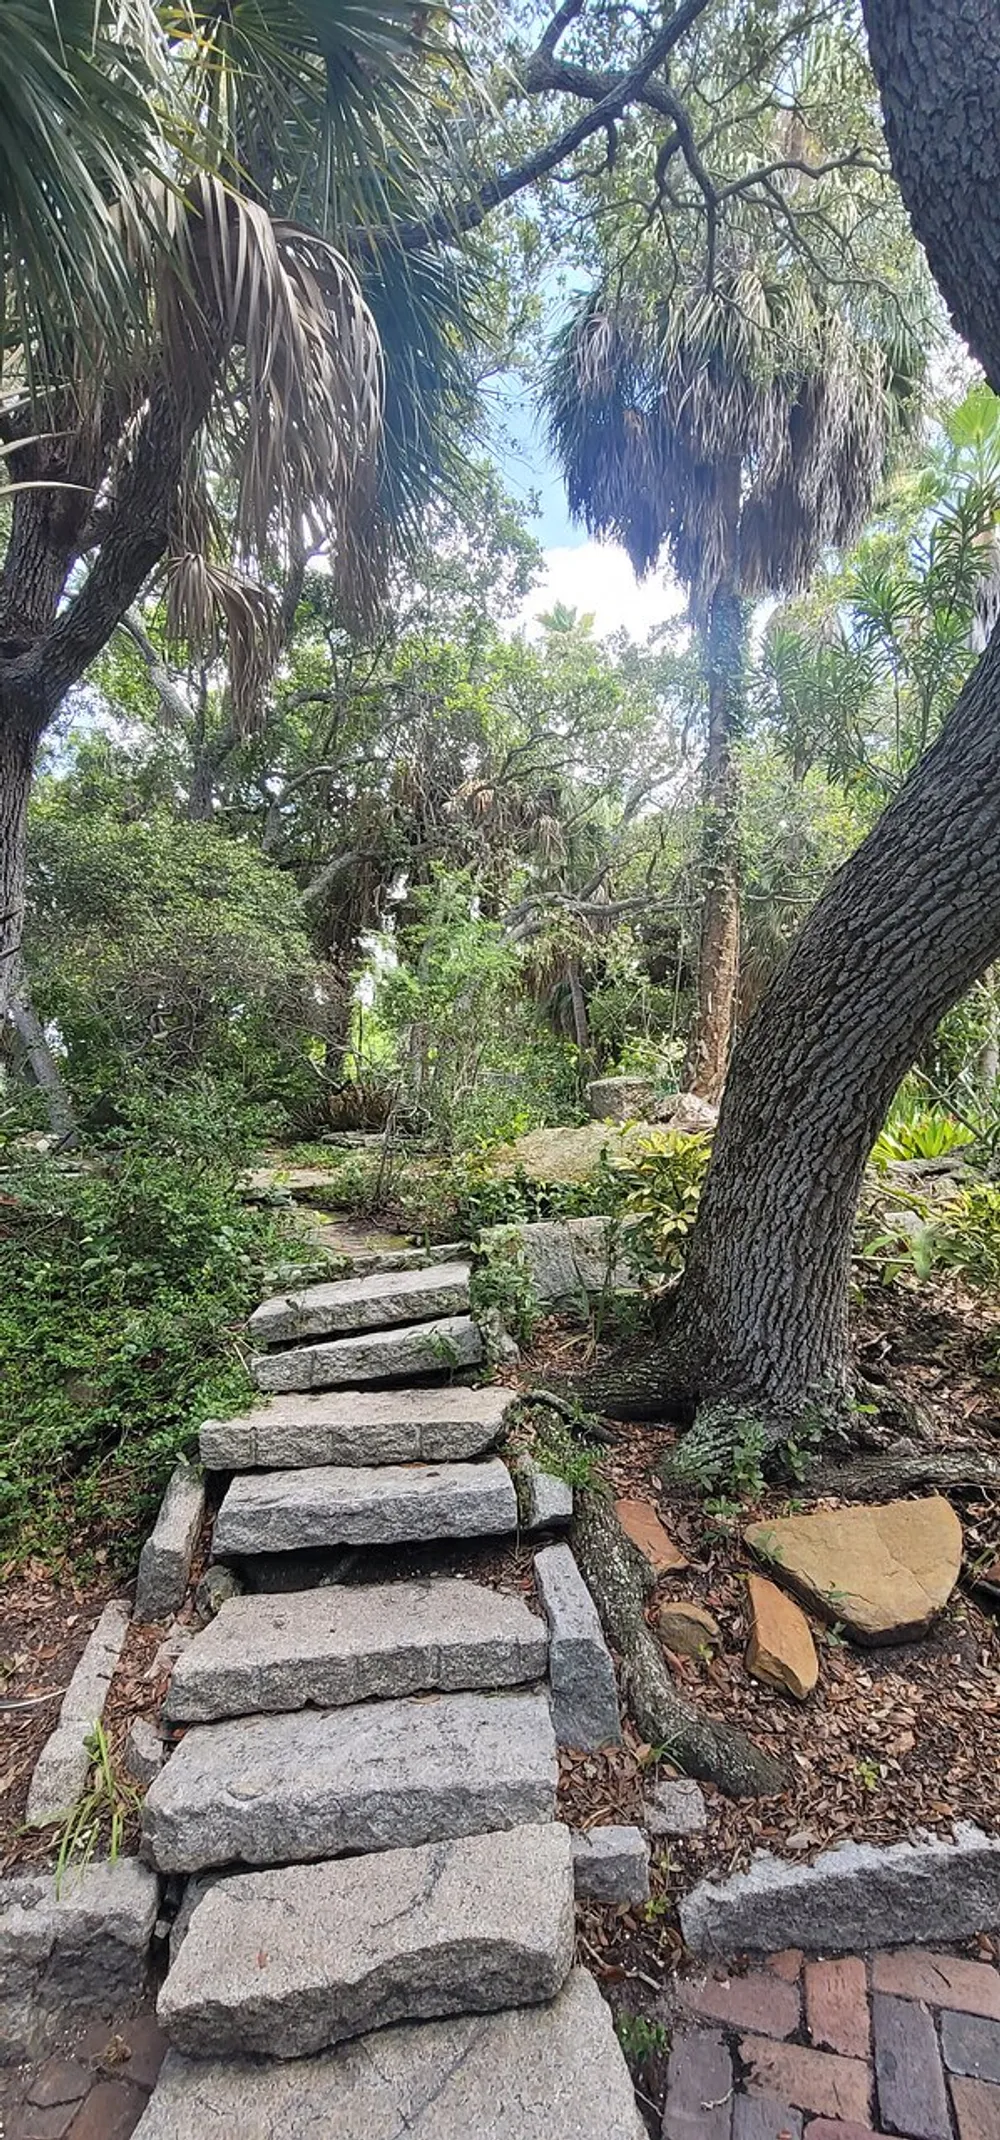 A stone pathway leads through a lush green garden filled with trees and plants evoking a serene natural environment